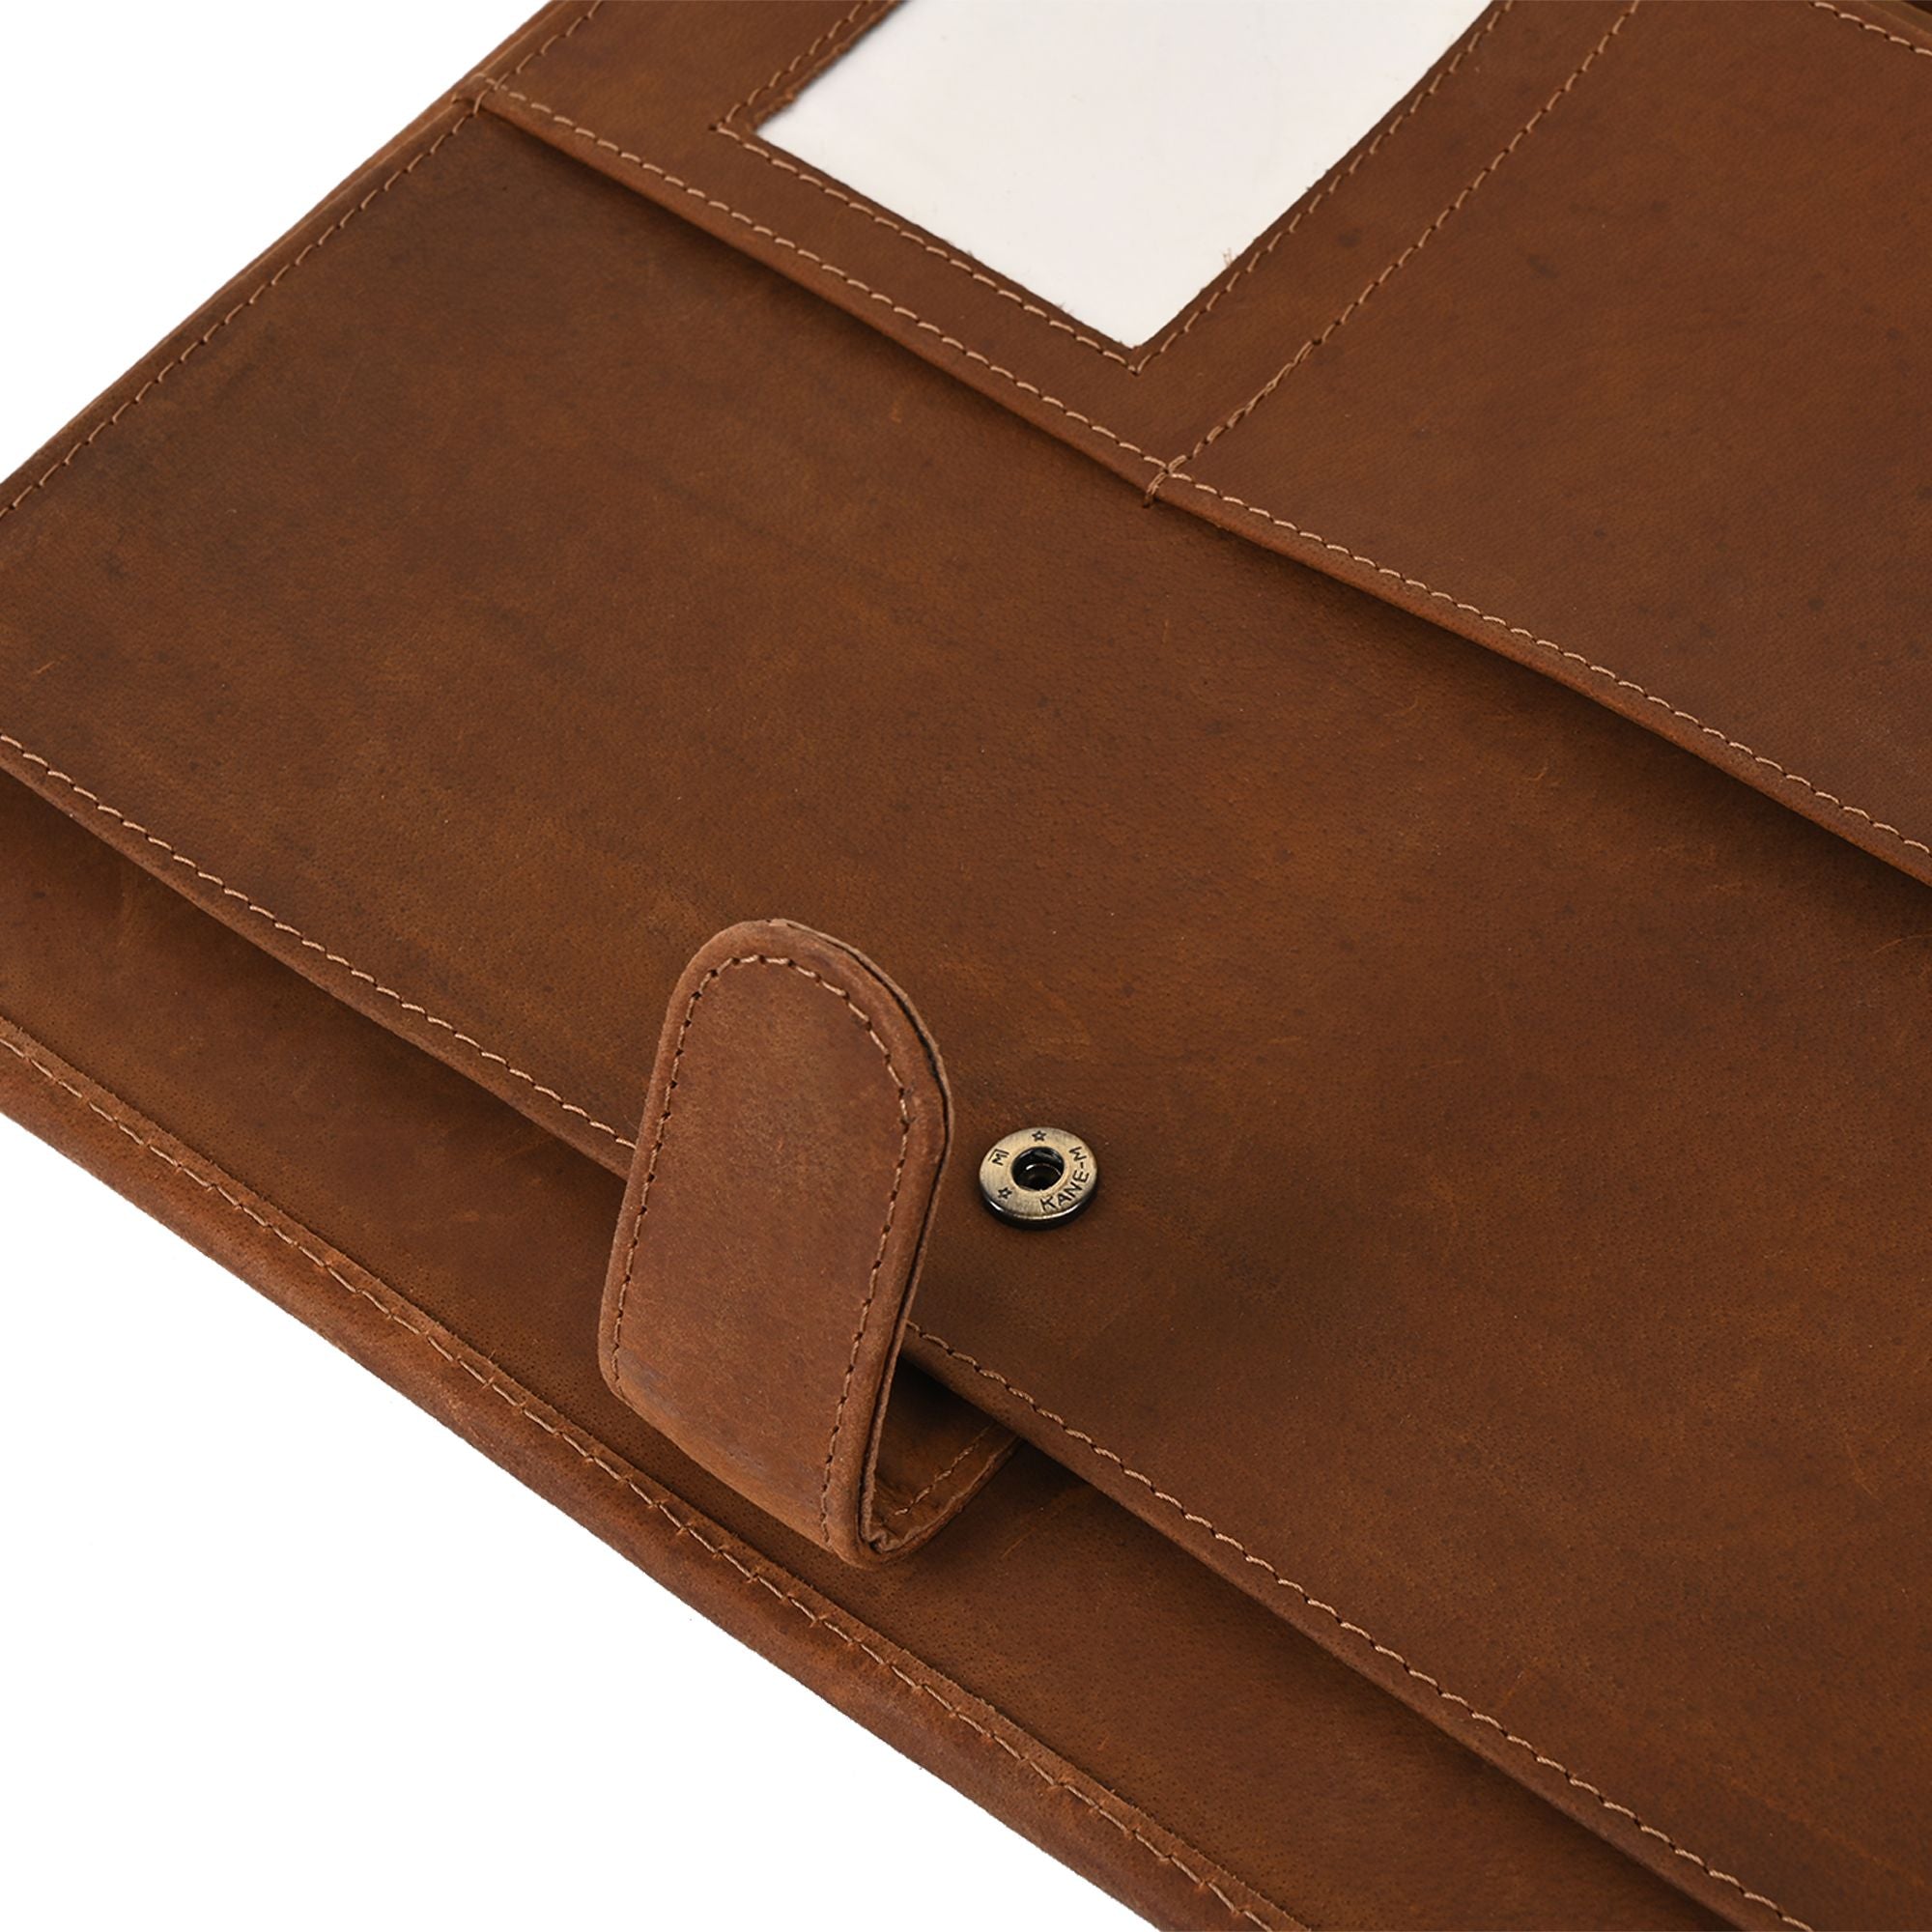 R & S BookMart - 'Portfolio Document Holder Bag' Leather Genuine Quality  with Zip 1) For Interview 2) For Documents safety 3) No need of lamination  4) For developing Protfolio. Delivery all